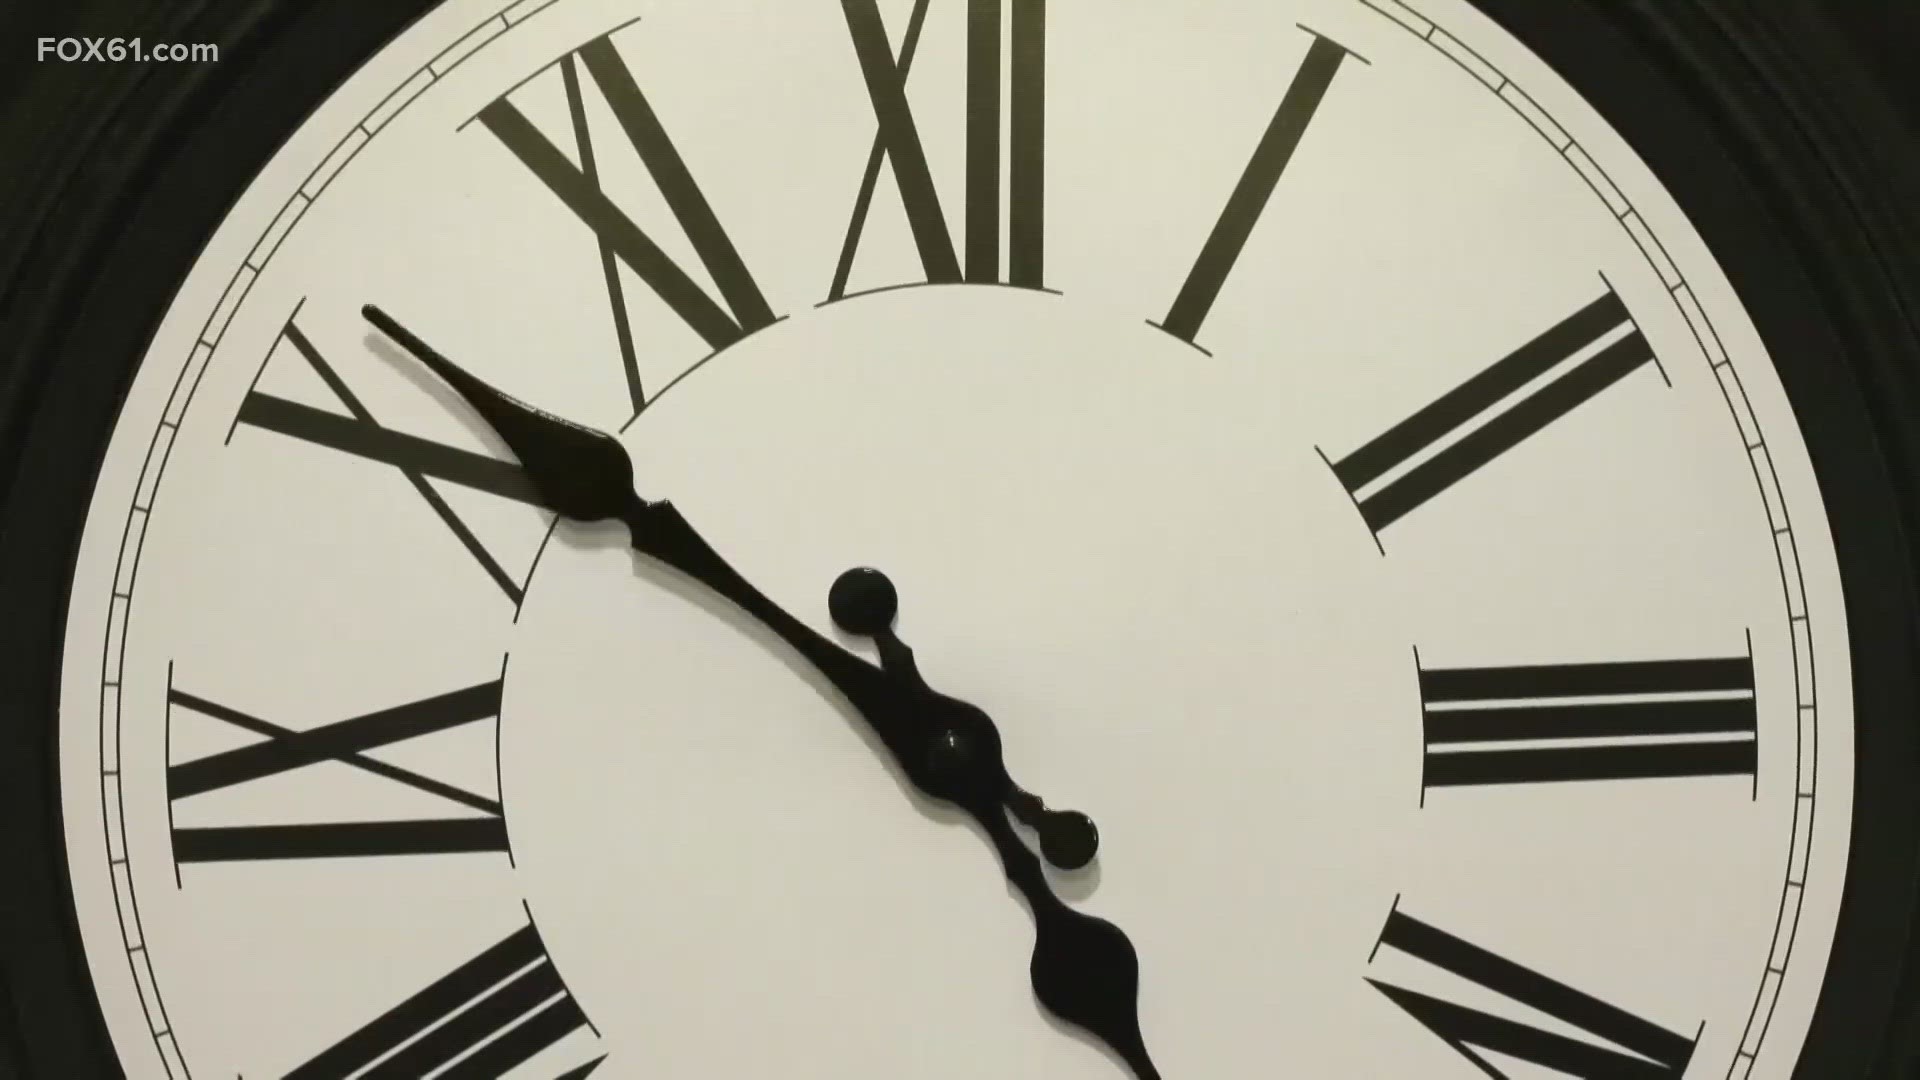 Most Americans are in favor of permanent daylight saving time, but health experts say there is a better option.